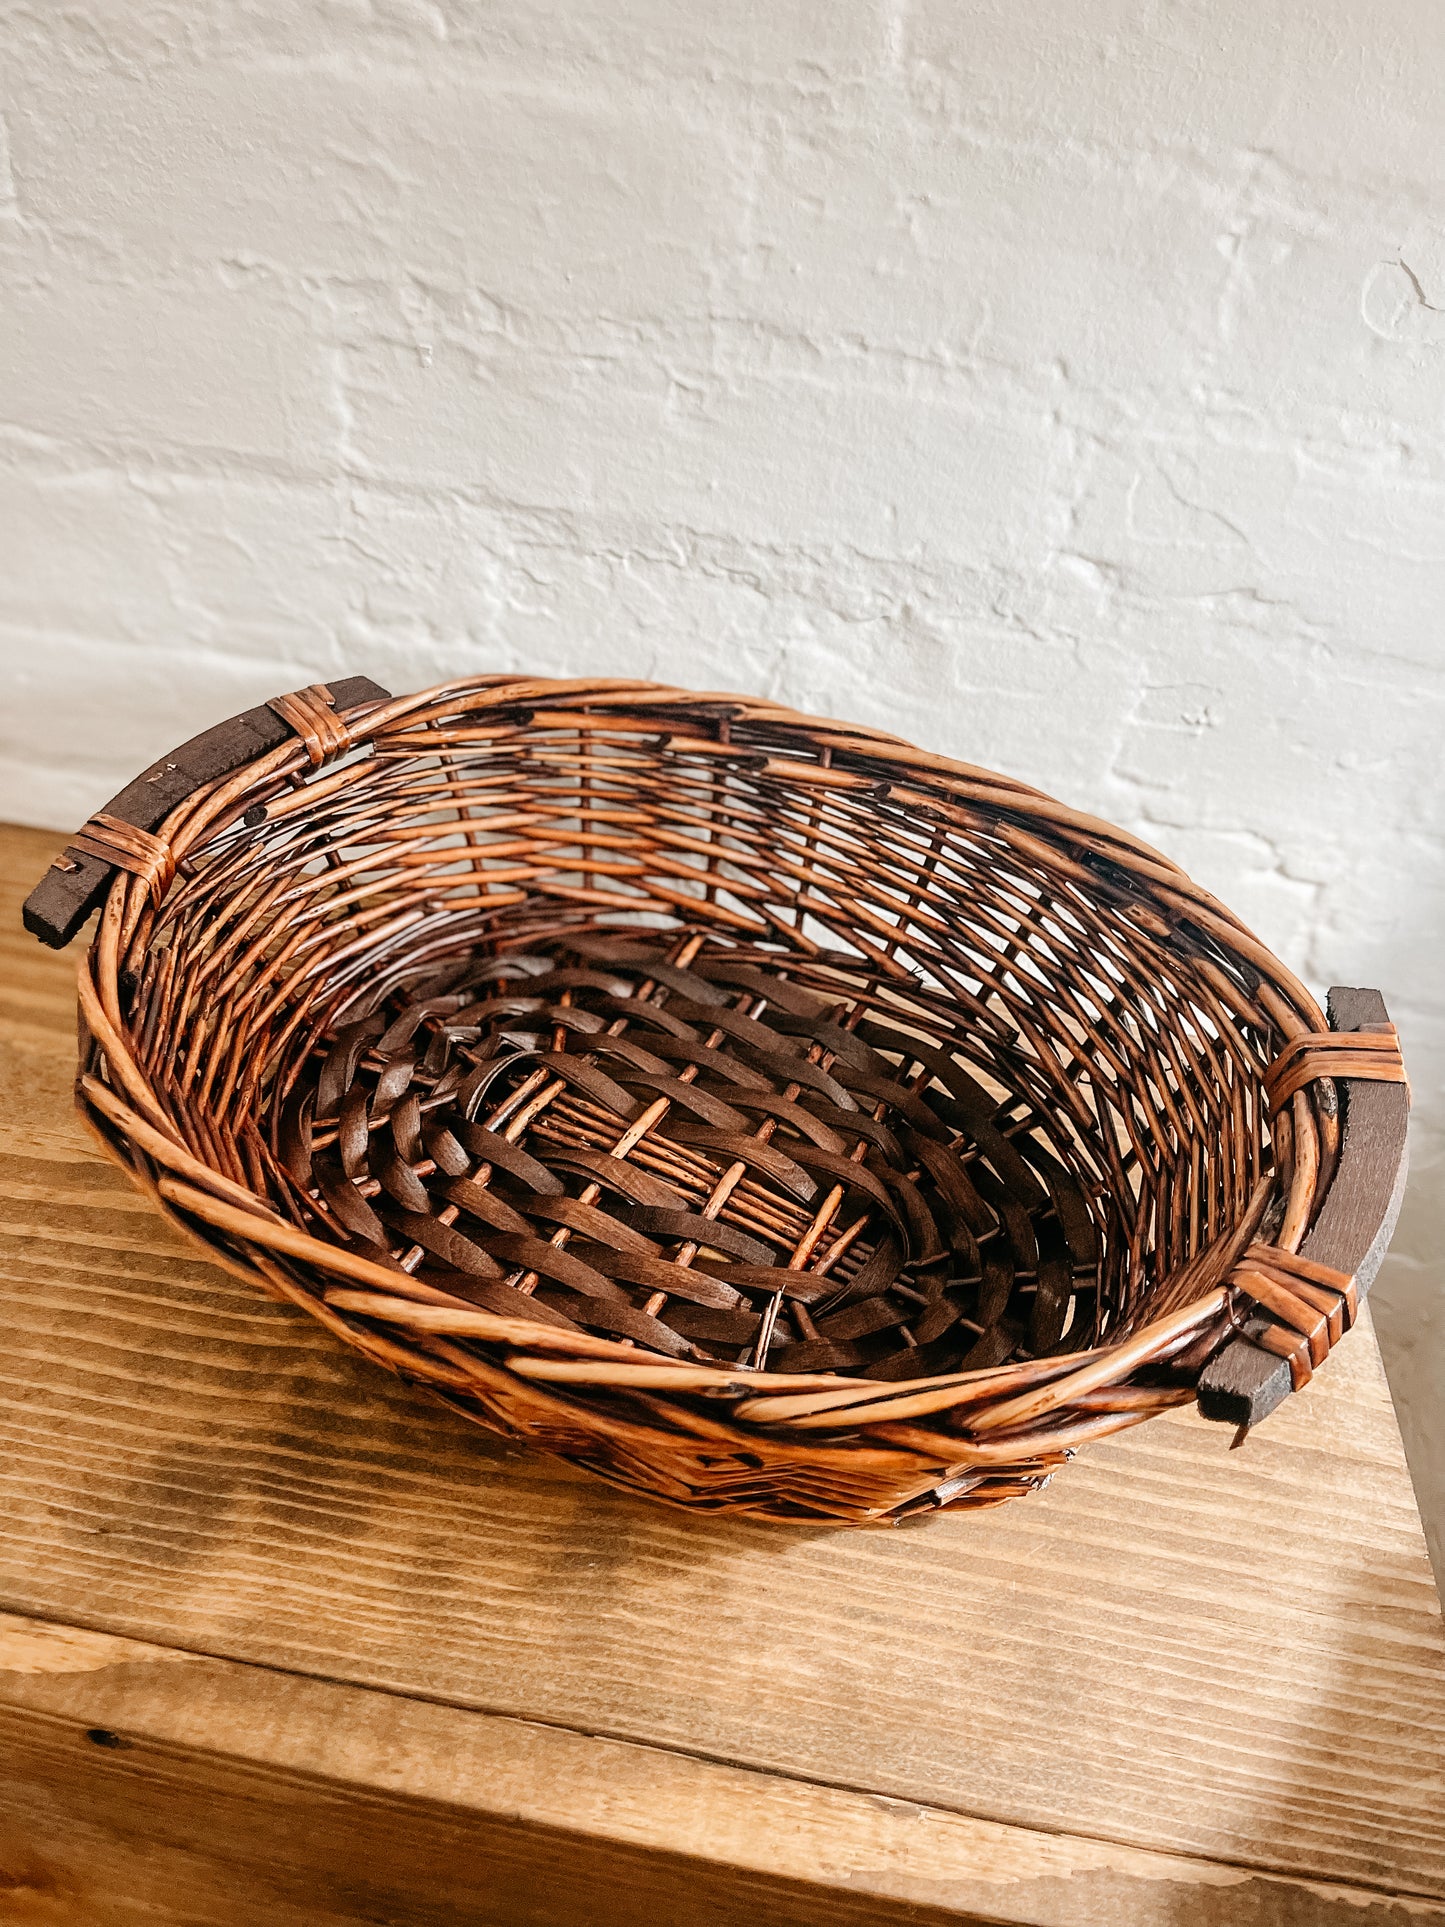 12" Oval Willow Tray Dark Brown Finish